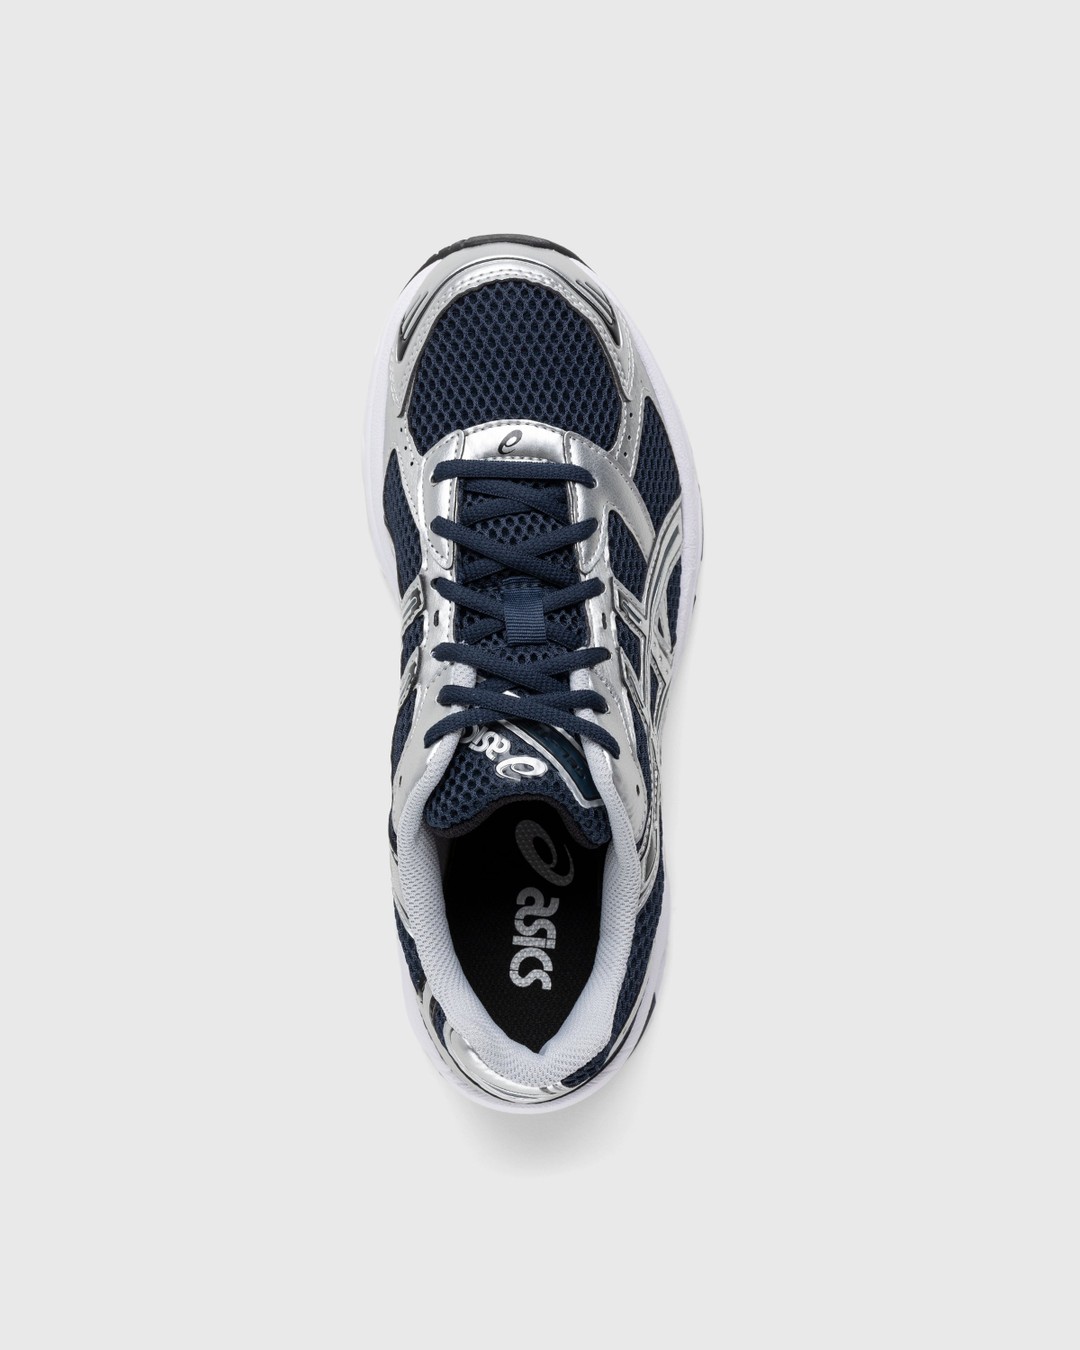 asics – GEL-1130 French Blue/Pure Silver - Sneakers - Blue - Image 5